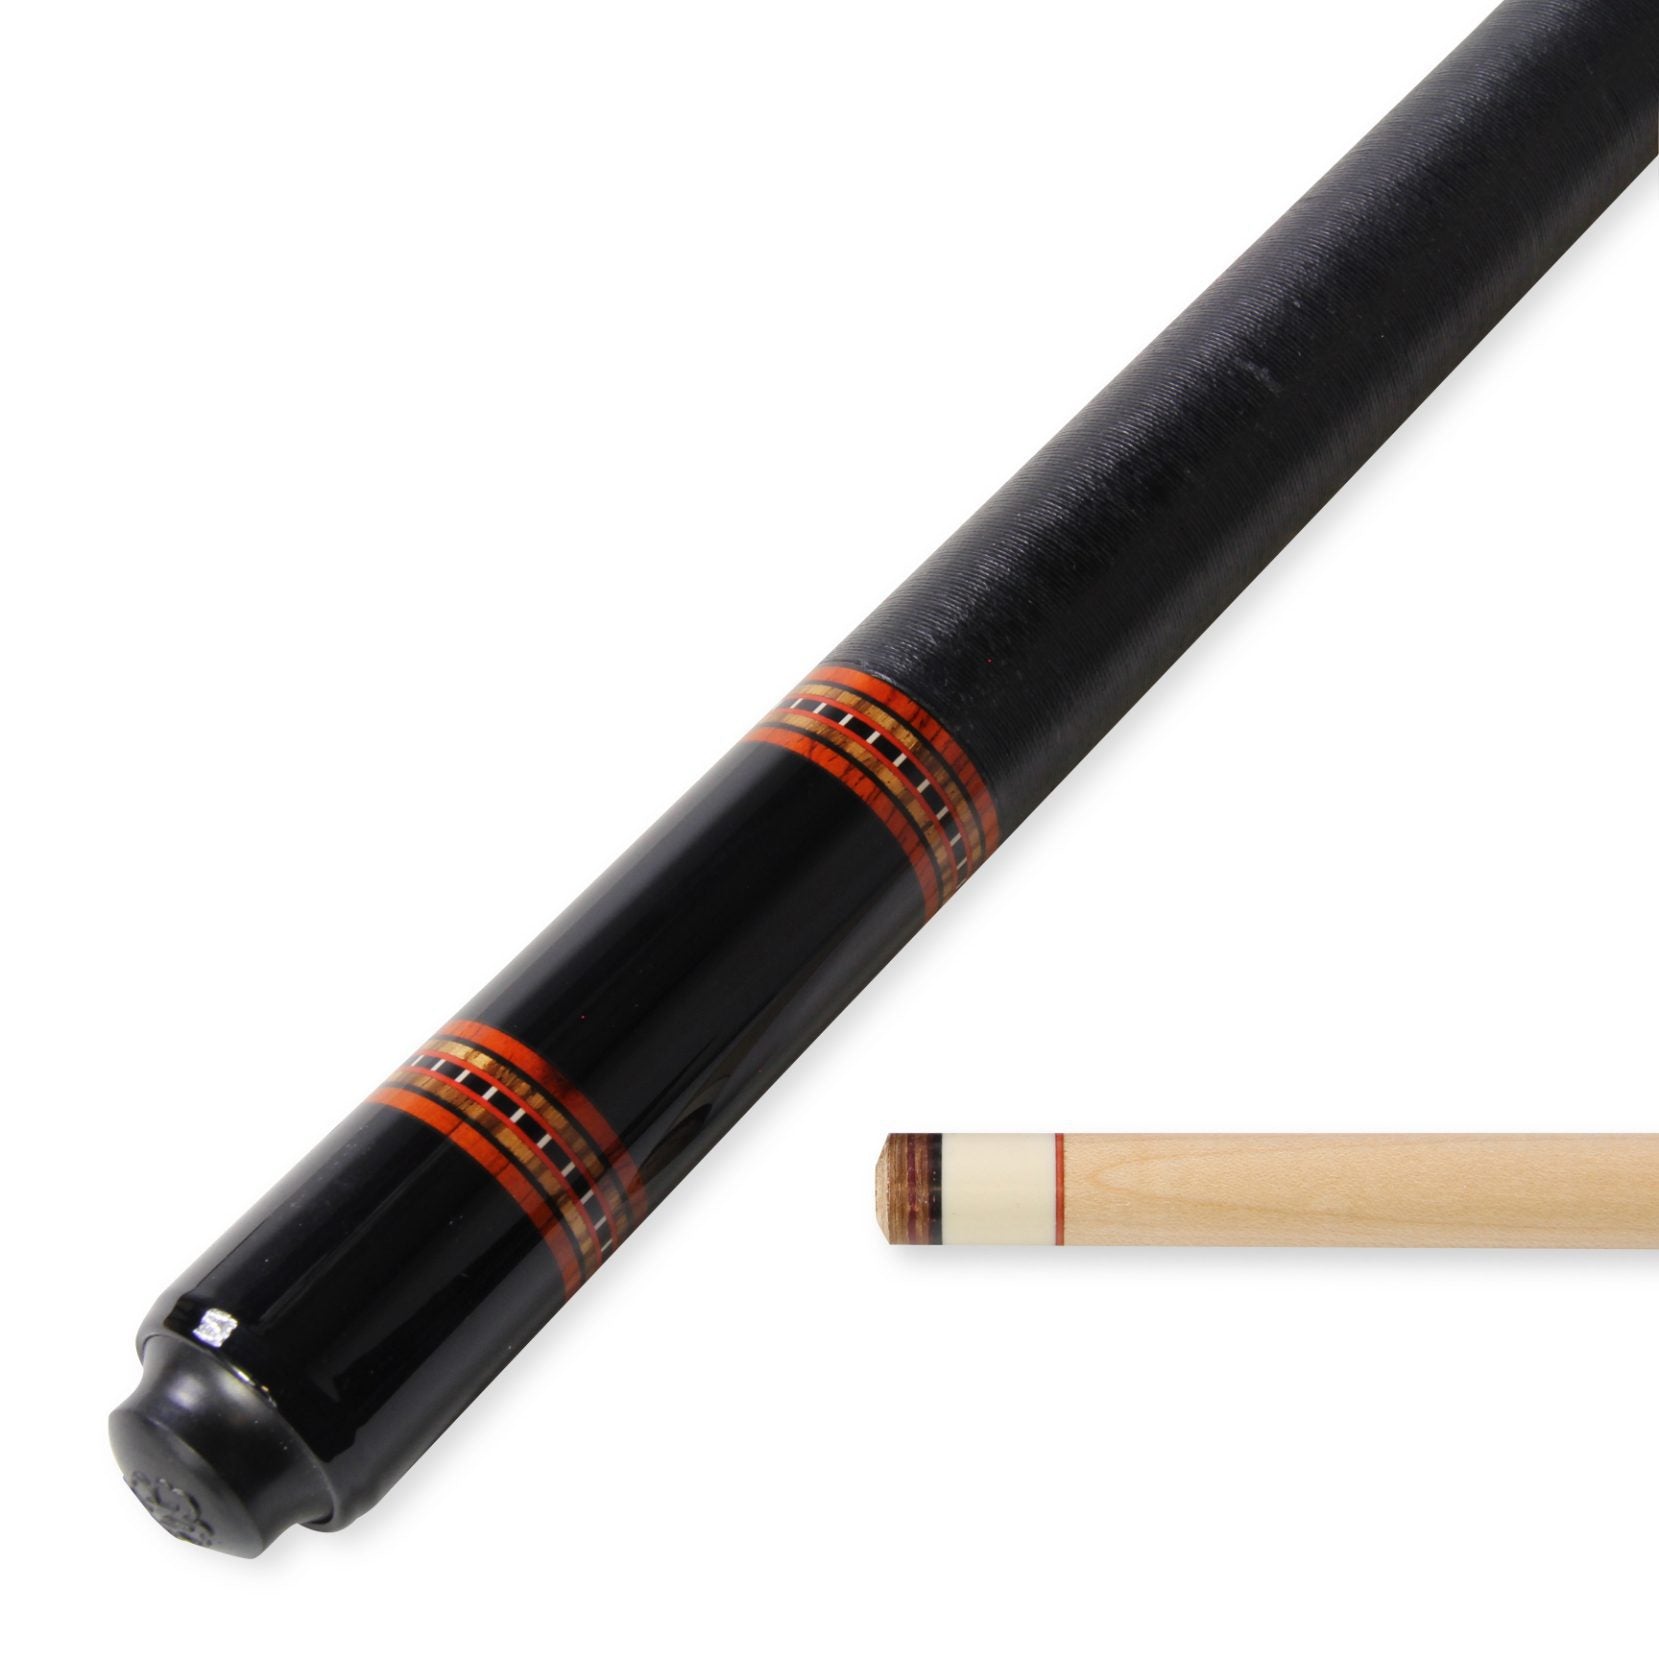 McDermott Hand Crafted G-Series American Pool Cue 13mm Tip – G225